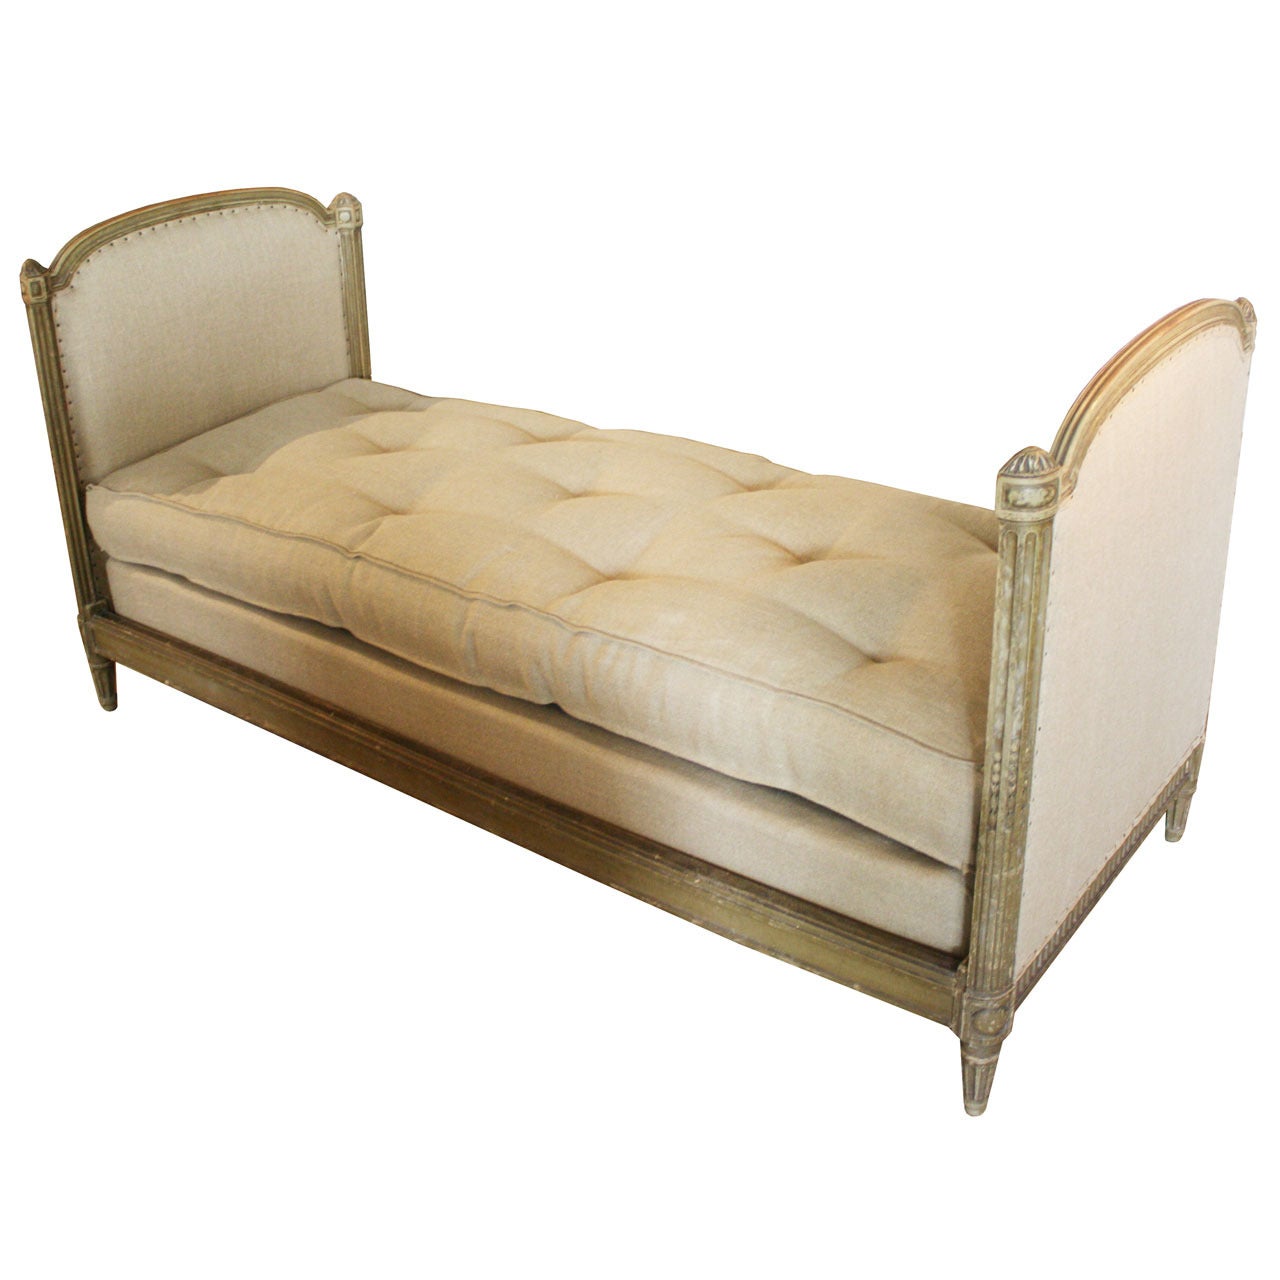 French daybed